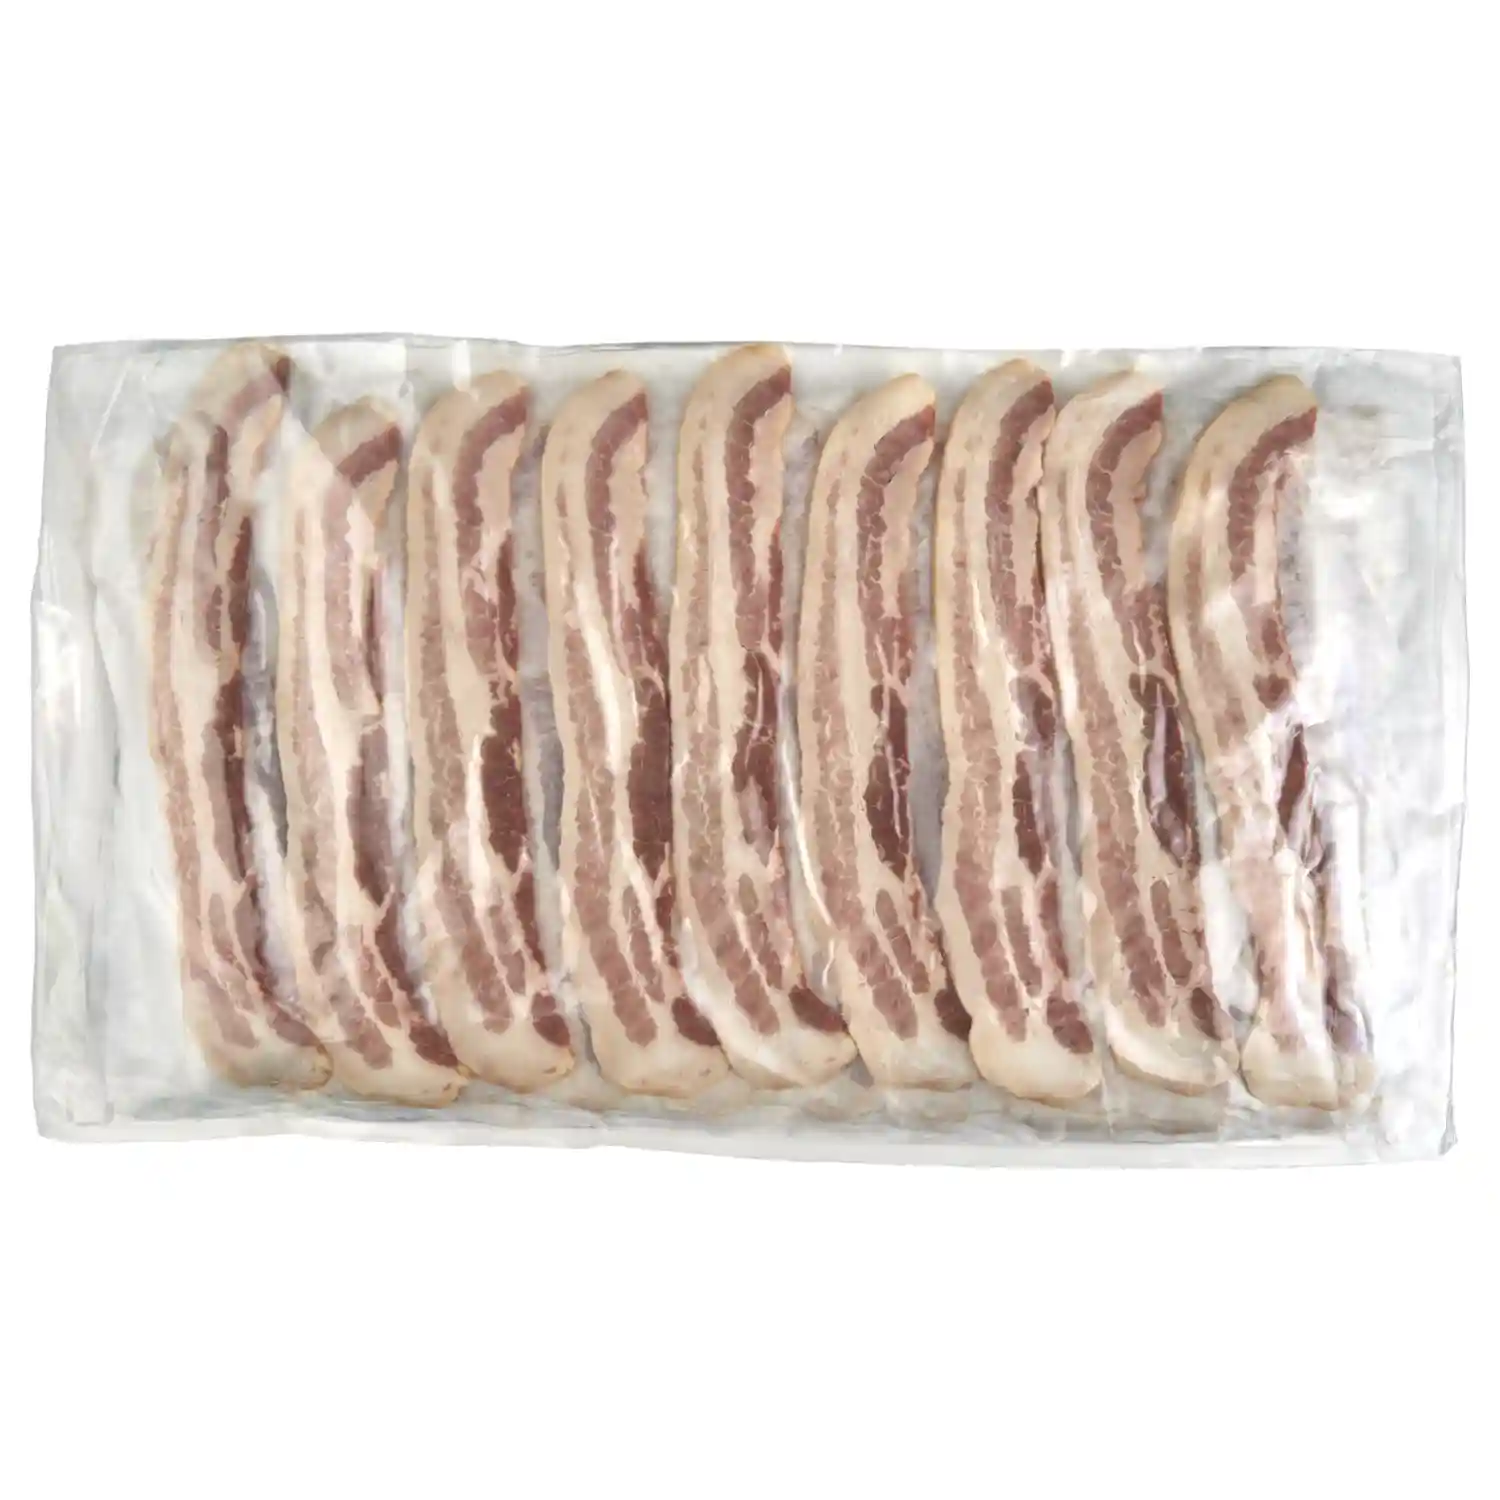 Wright® Brand Naturally Applewood Smoked Regular Sliced Bacon, Flat-Pack®, 15 Lbs, 14-18 Slices per Pound, Gas Flushed_image_31